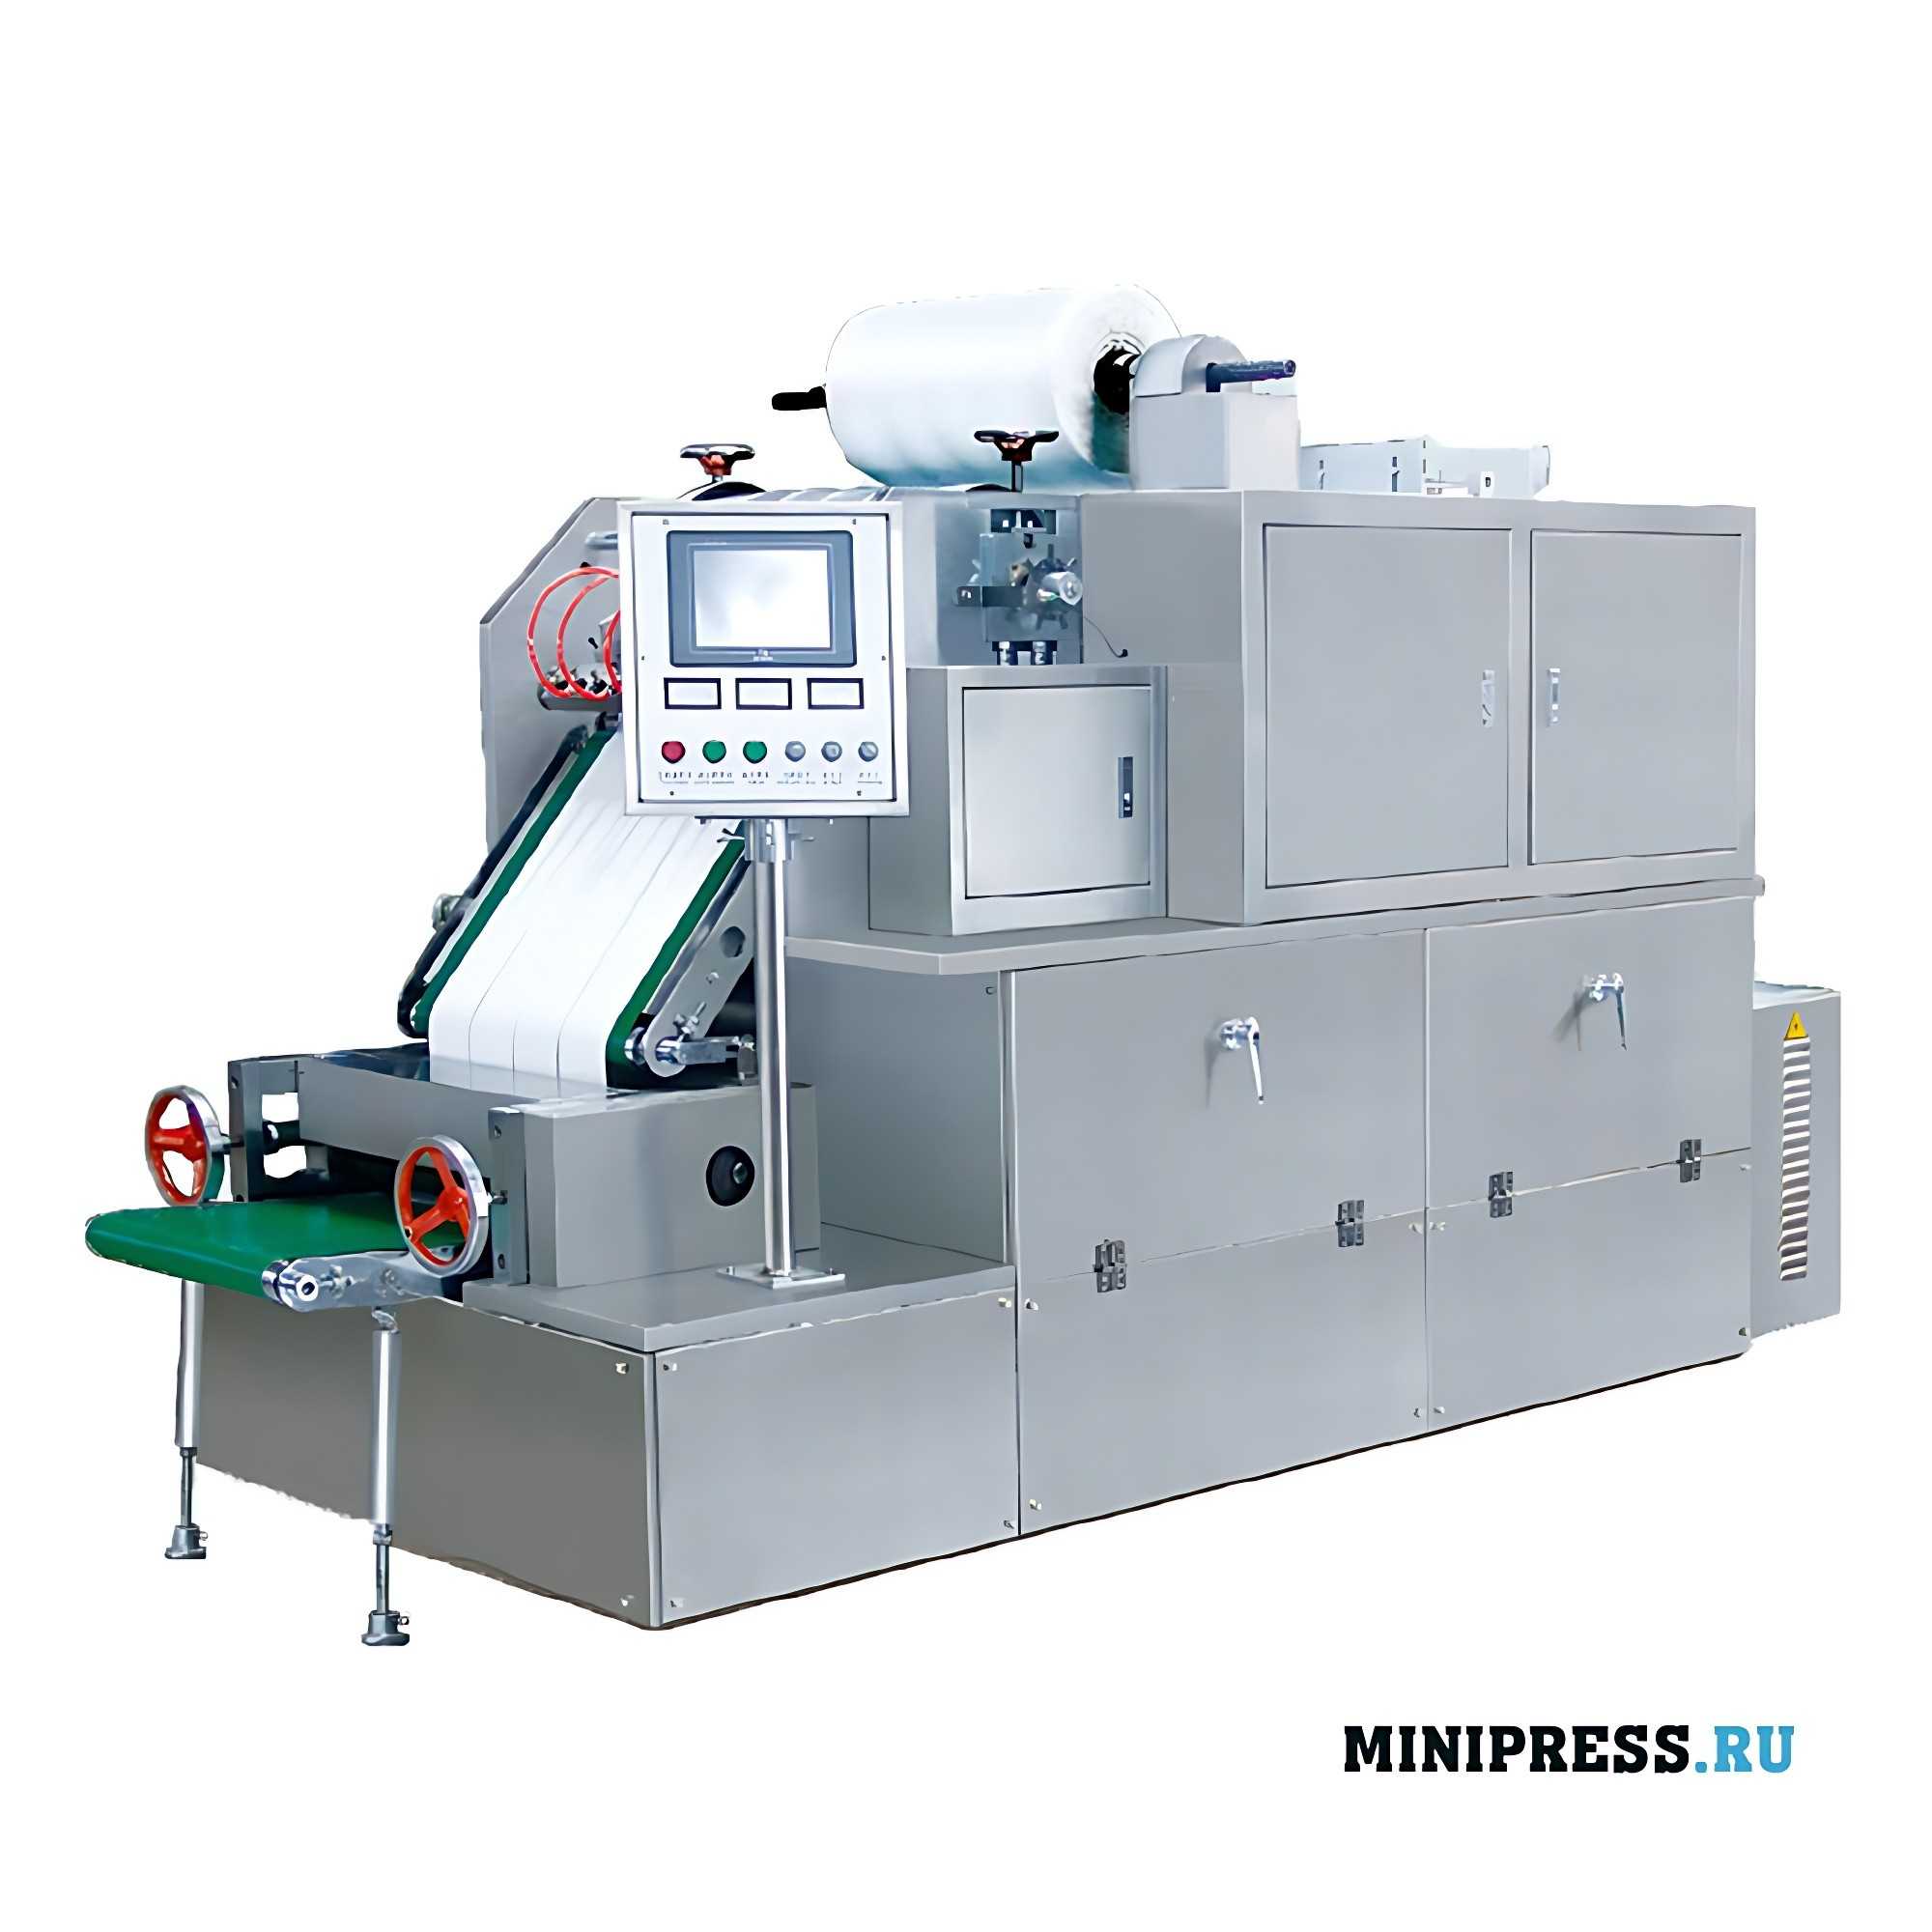 Equipment for cutting napkins on a non-woven basis with hydrogel WXM 1